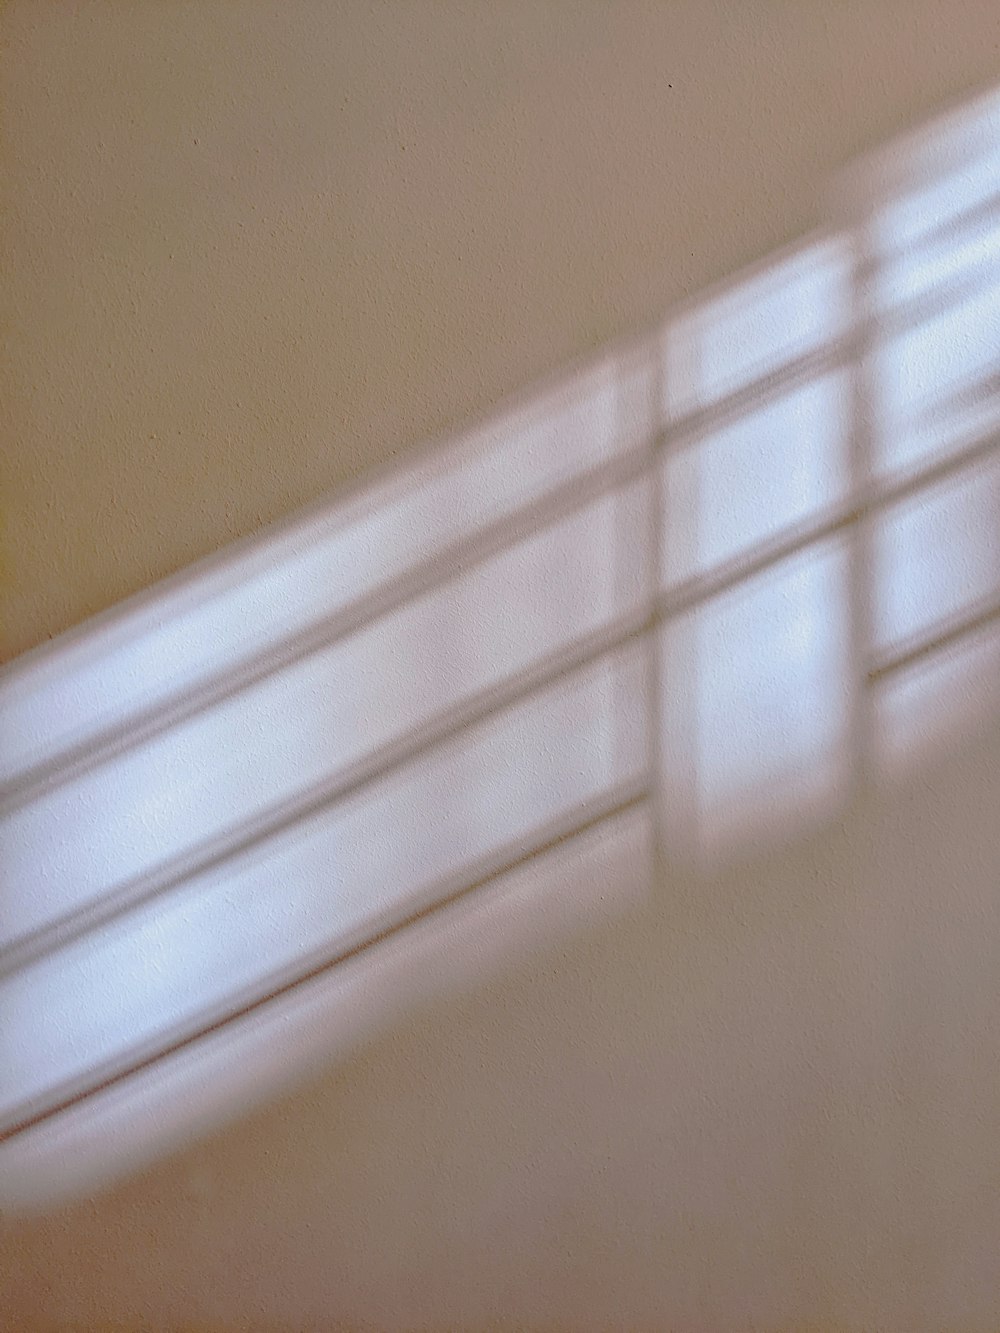 a blurry photo of a wall and a window